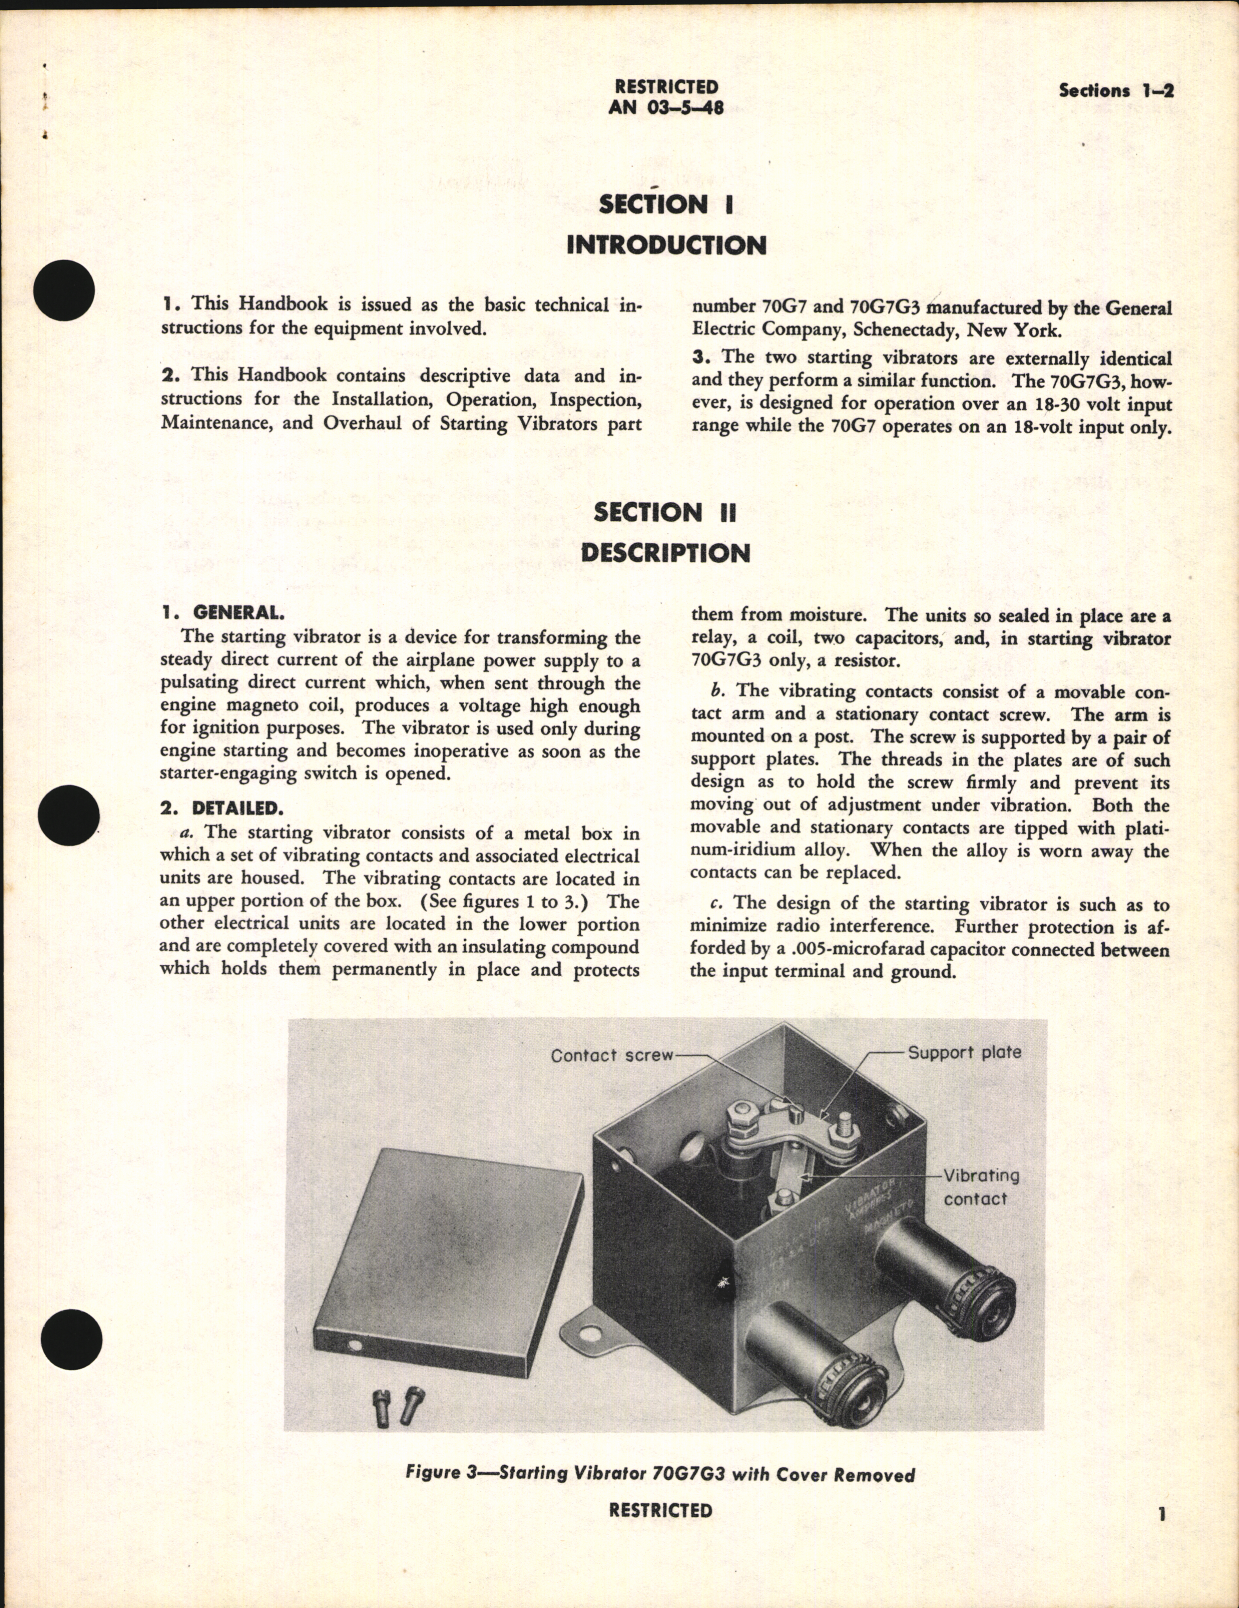 Sample page 5 from AirCorps Library document: Handbook of Instructions with Parts Catalog for Starting Vibrators 70G7 and 70G7G3